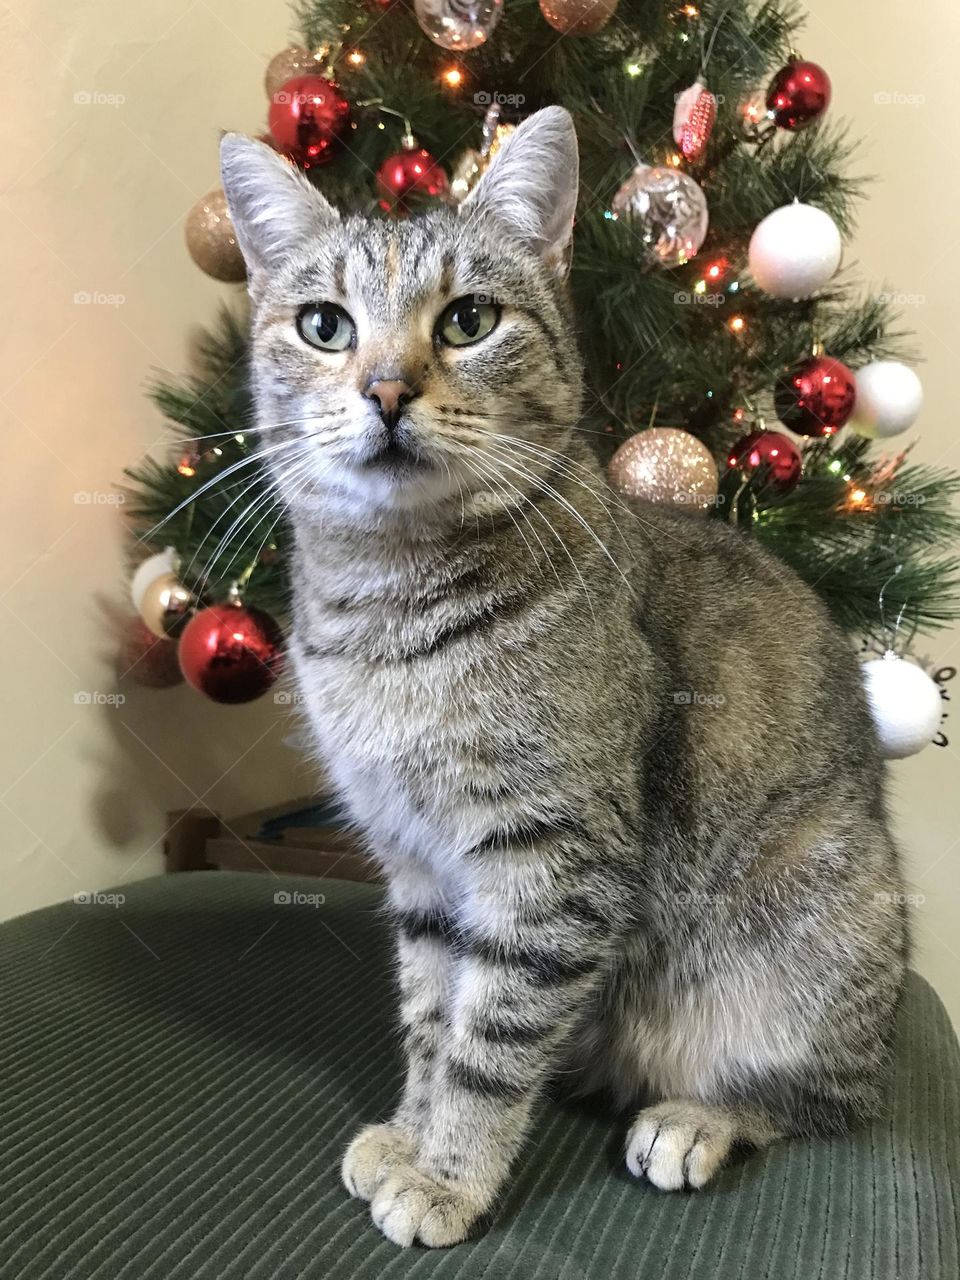 Cat posing in front of a Christmas tree.